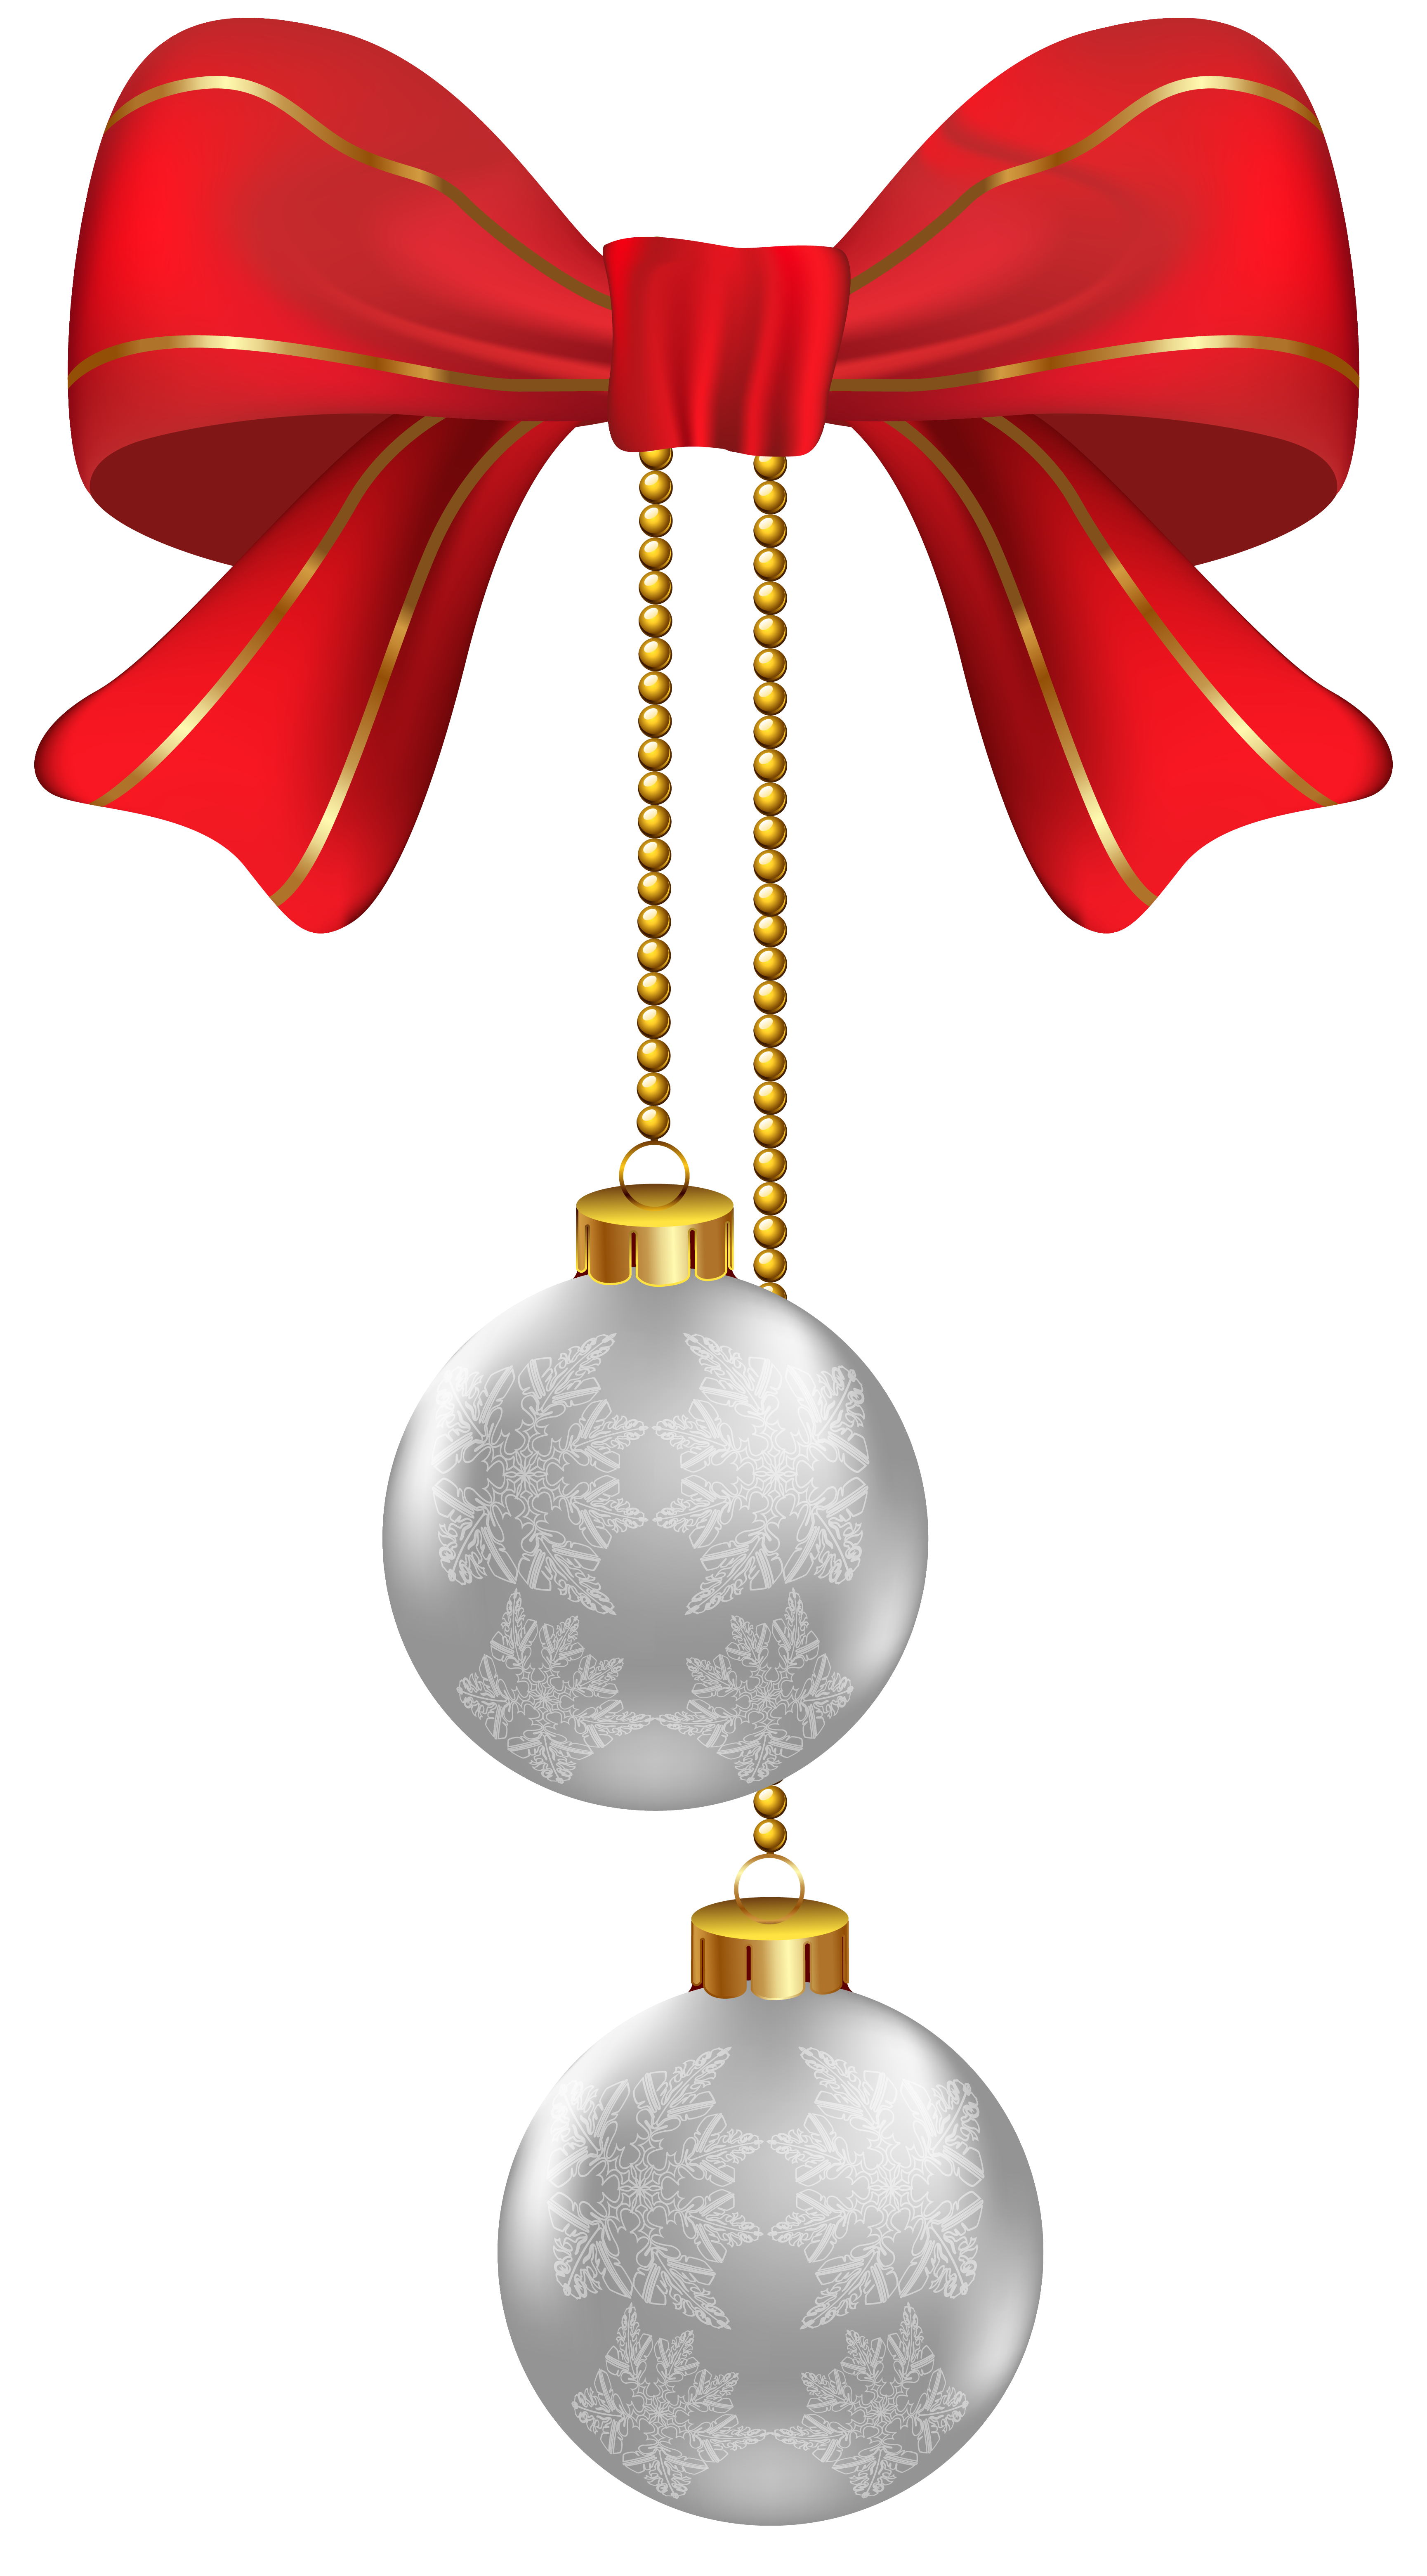 Hanging christmas silver ornaments. Garland clipart bauble